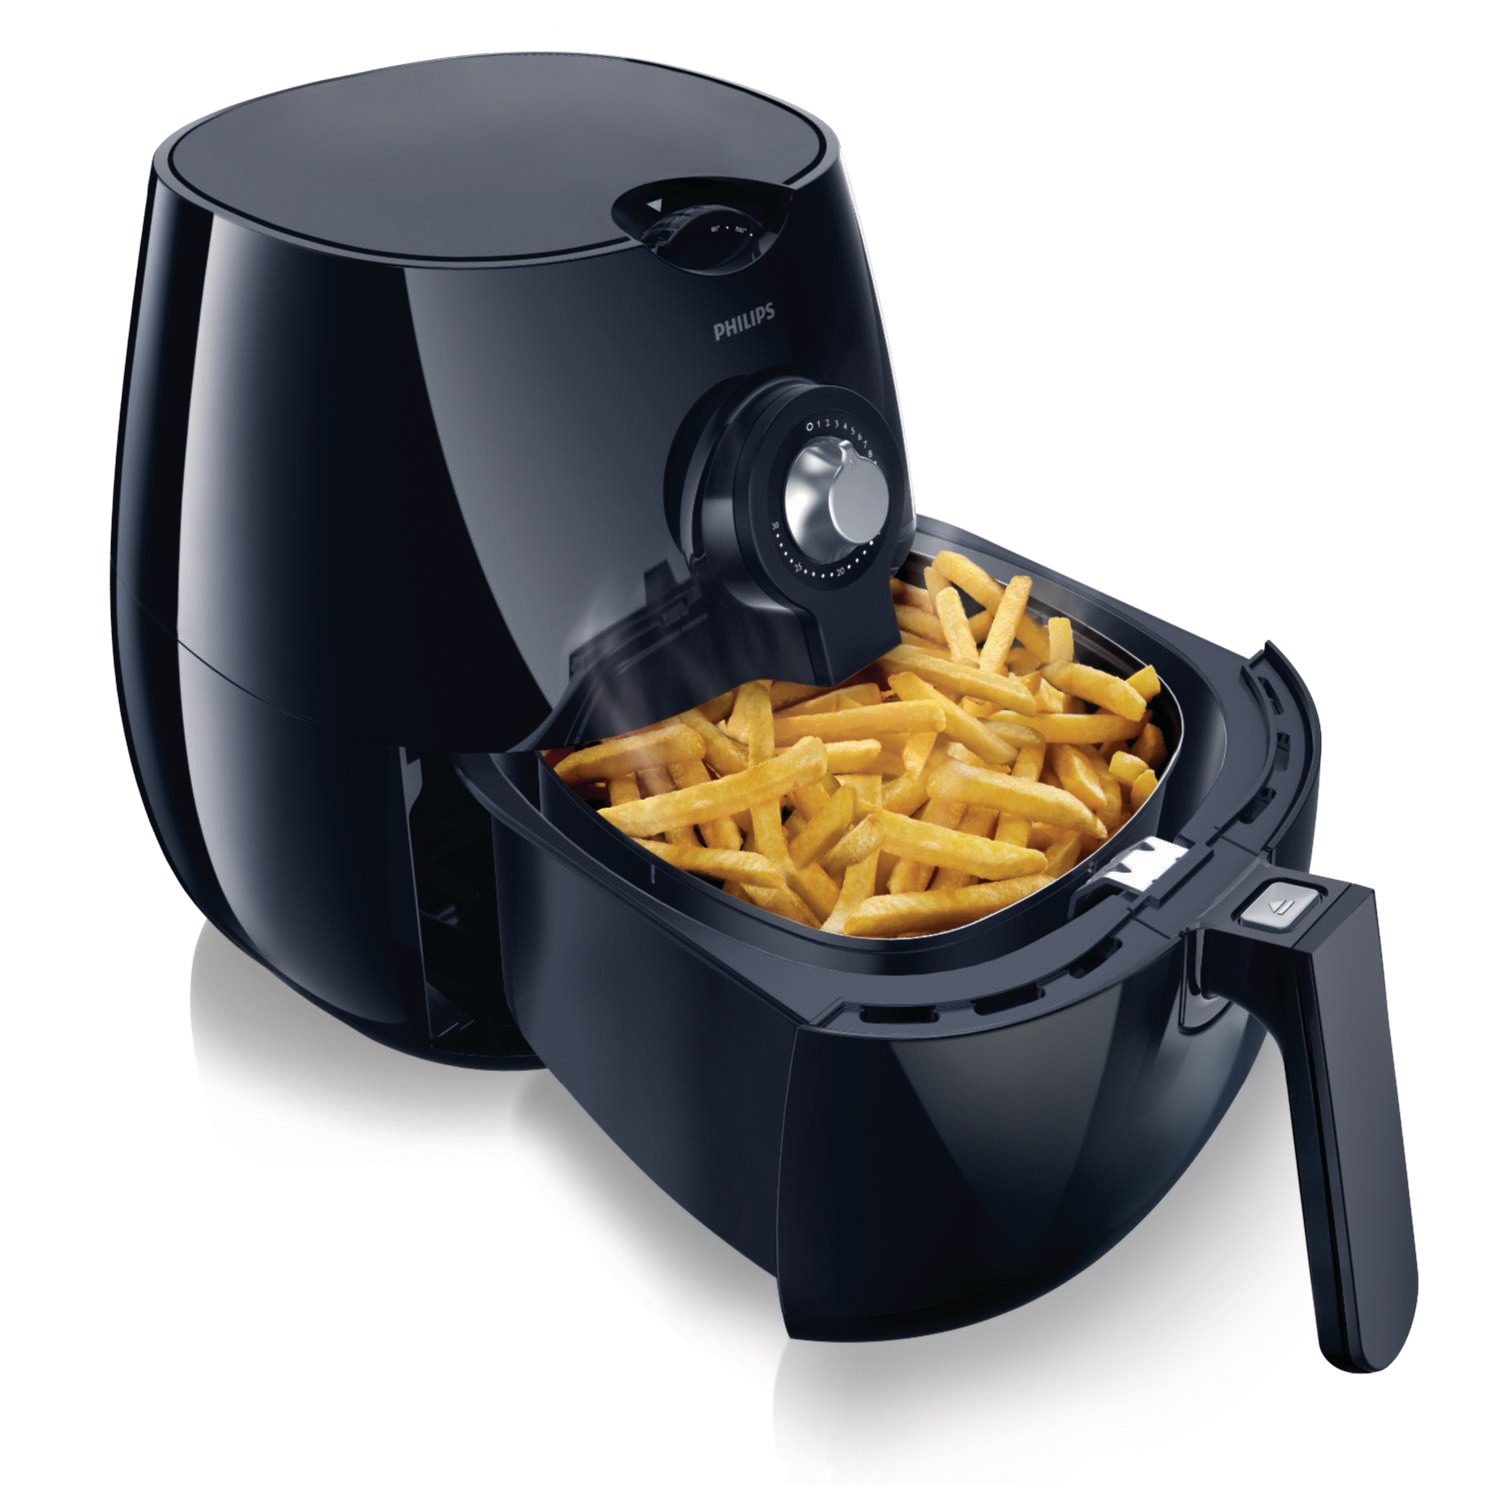 Onschuld donor Gouverneur Why You Need The Philips Viva Collection Airfryer - Just Short of Crazy